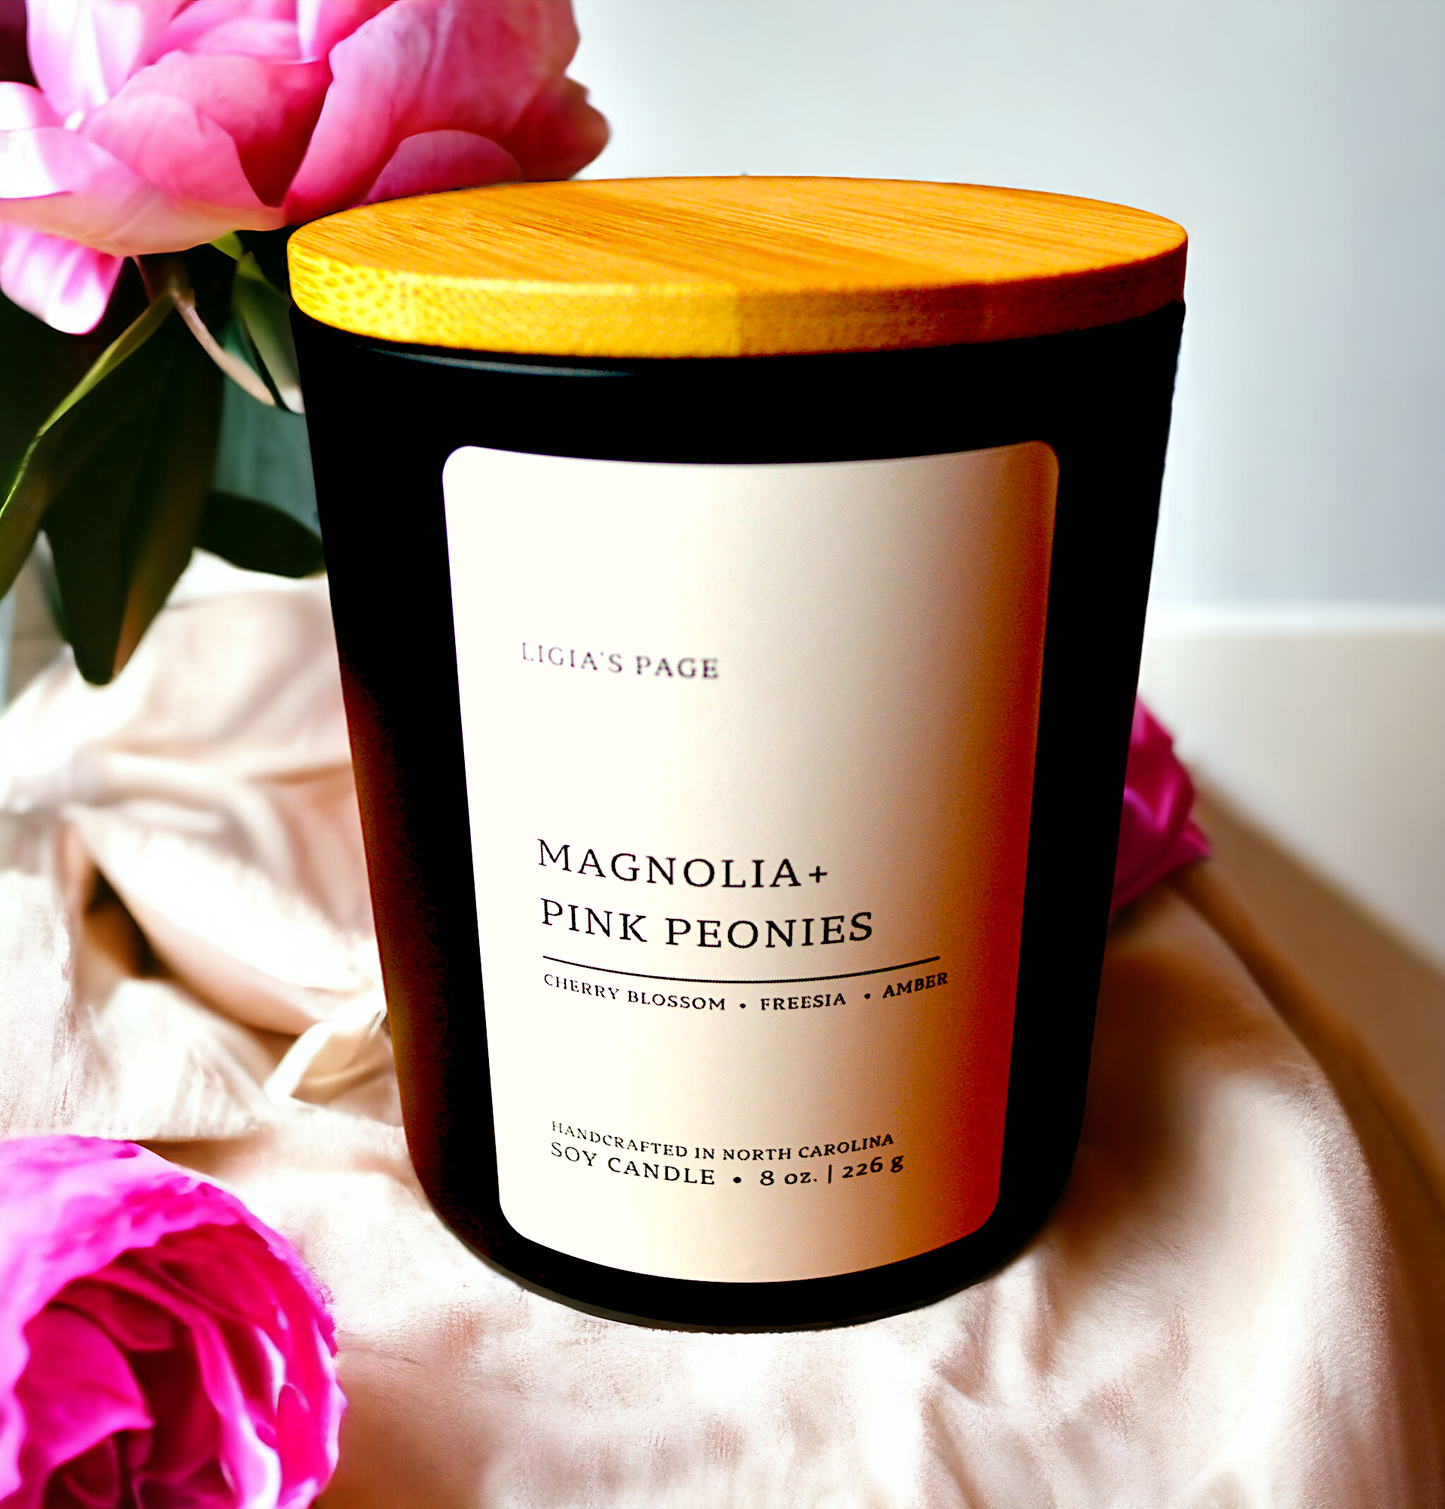 Magnolia and Pink Peonies Candle